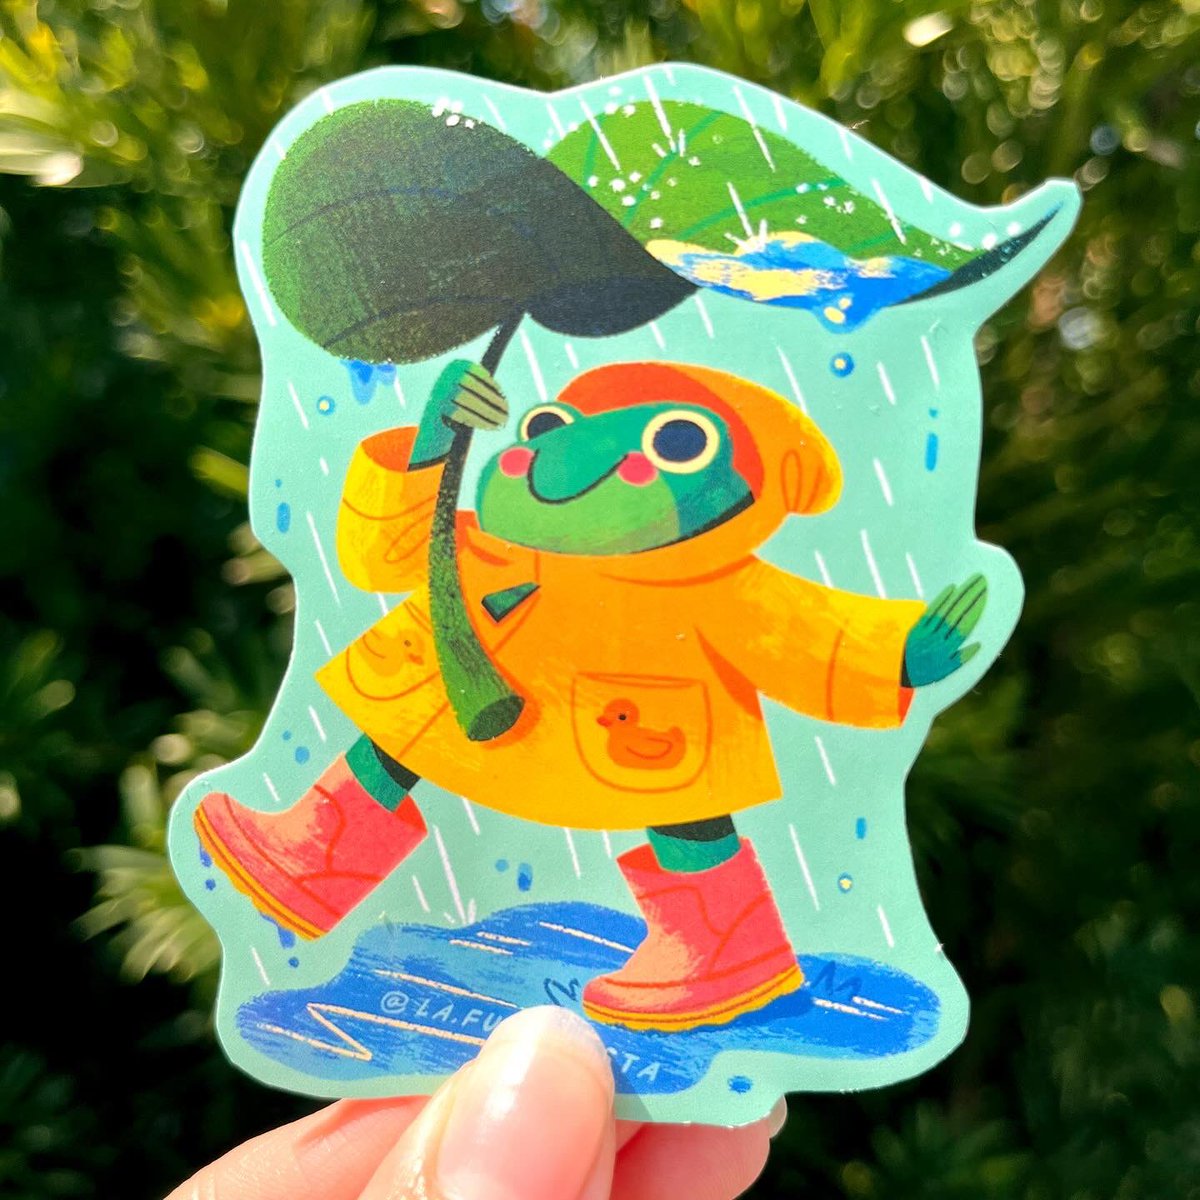 There’s still time to get this sticker, just join my monthly sticker club on Patreon! For $3 a month, you get a new sticker, $7 gets you the sticker plus as art print postcard. patreon.com/LaFumettista or link in bio #frogart #frogsticker #illustration #stickerclub